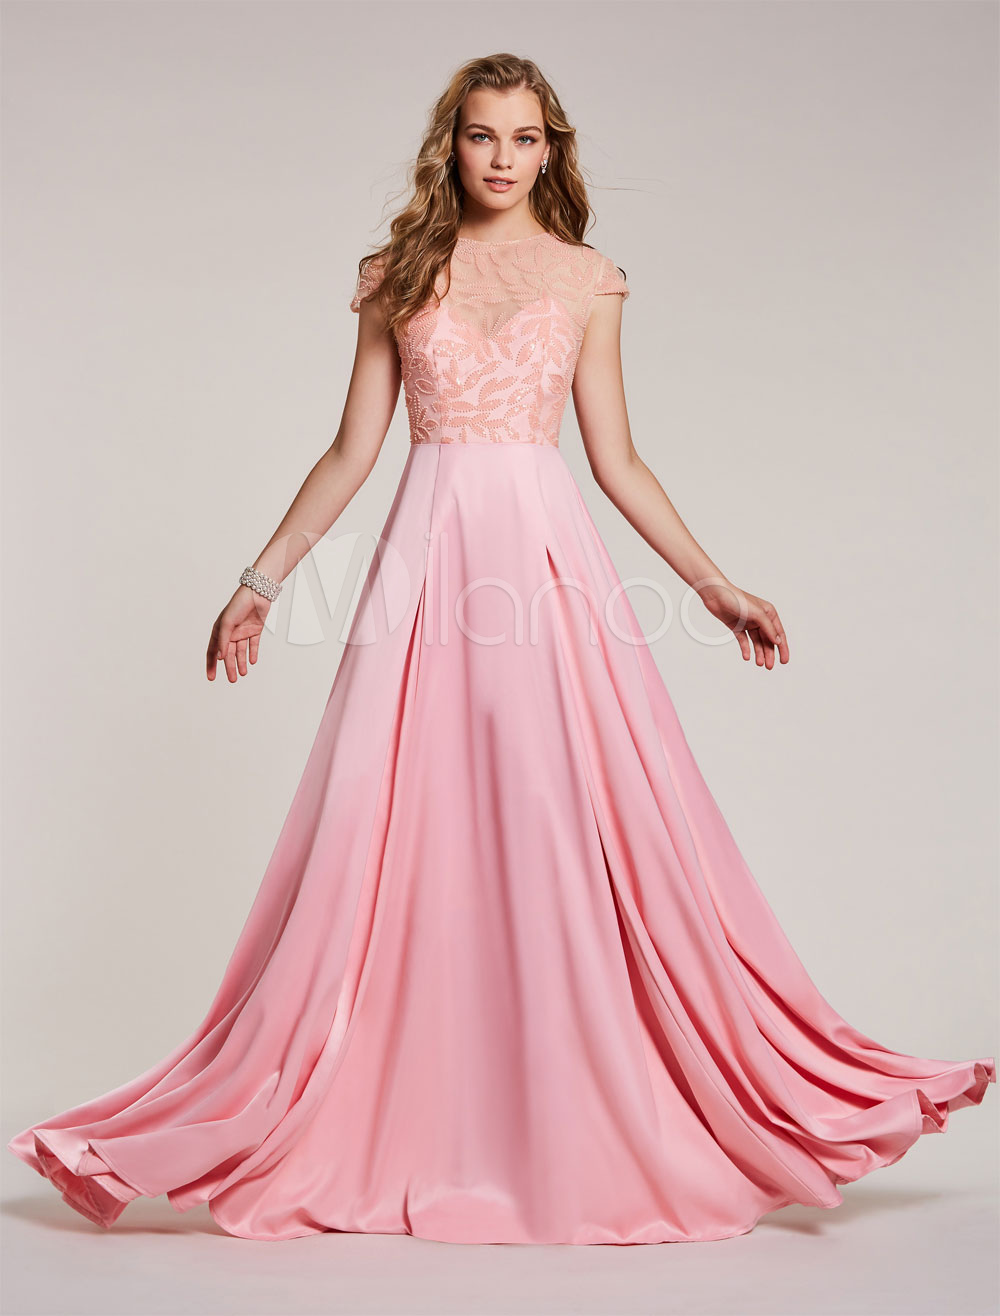 Prom Dresses Long Soft Pink Satin Cap Sleeve Beading Floor Length Formal Gowns (Wedding Cheap Party Dress) photo